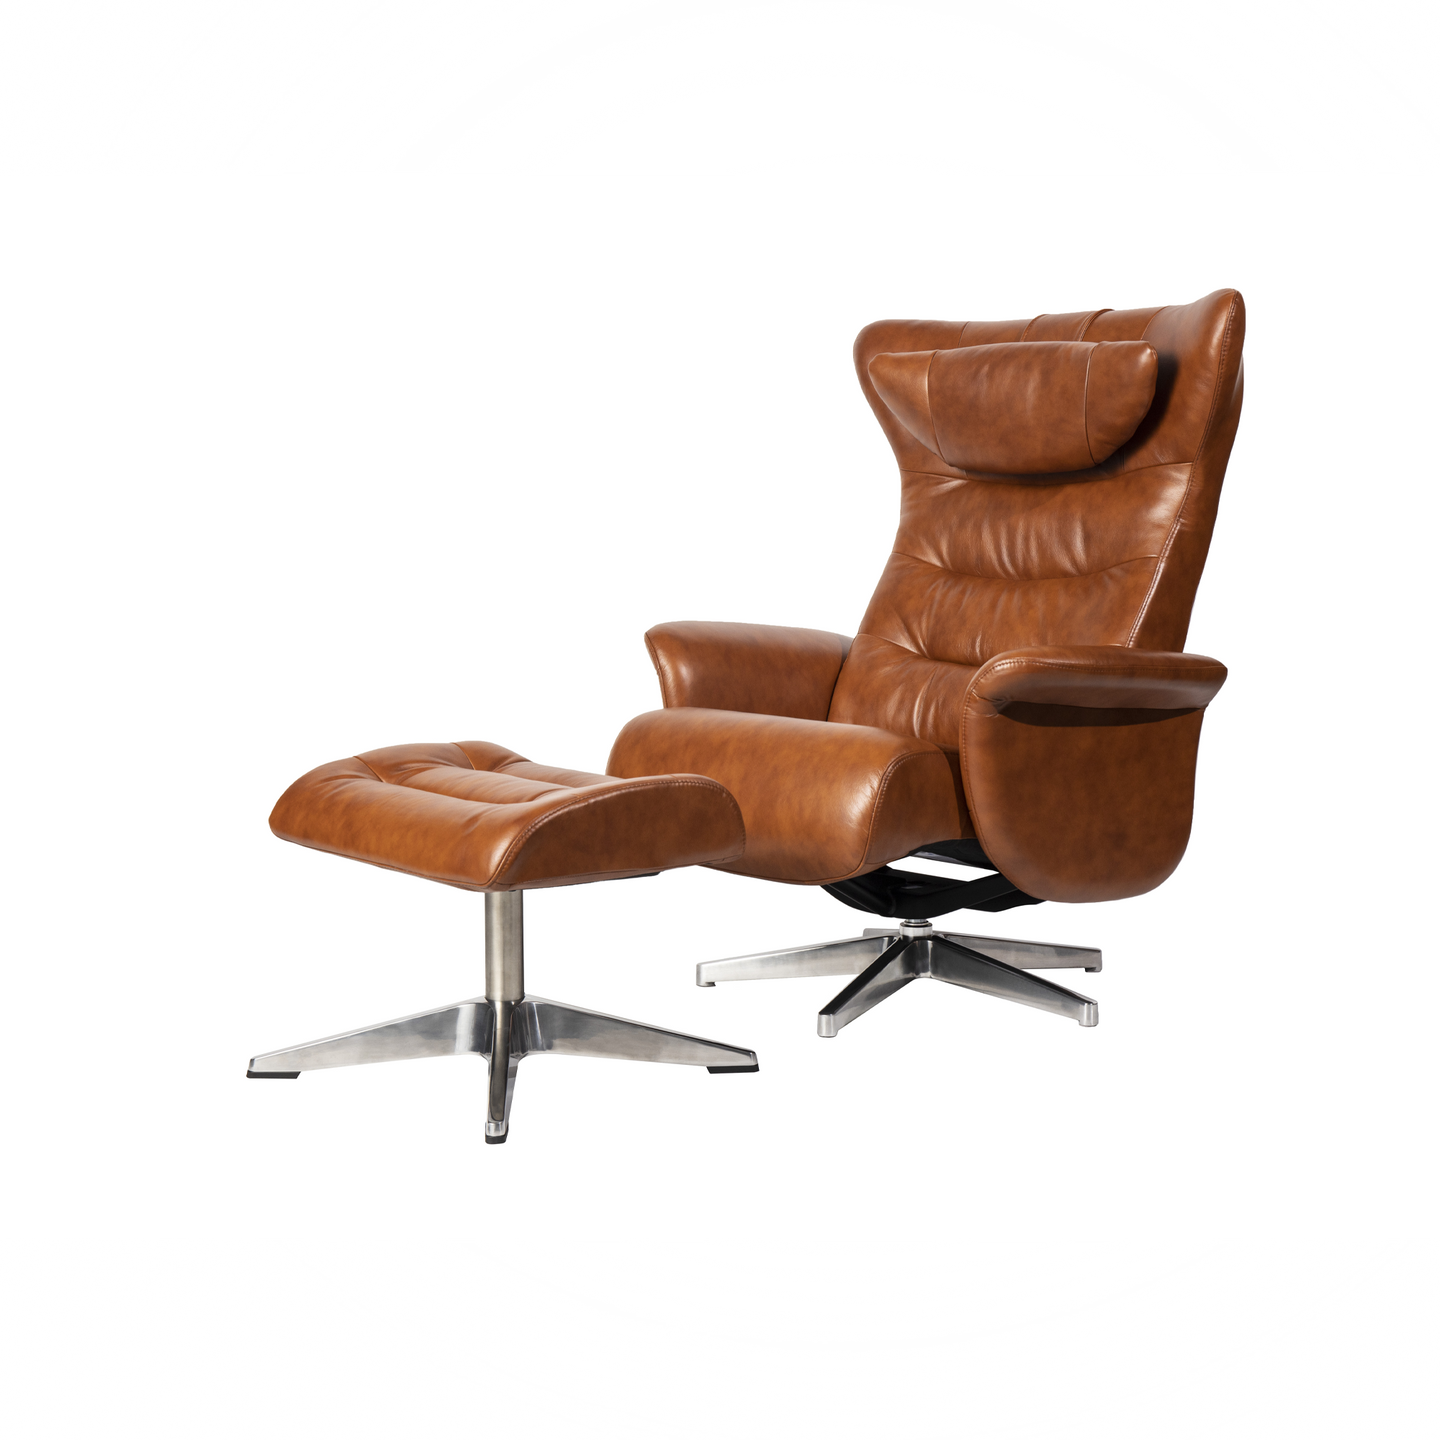 This Verra Recliner Lounge Chair has been crafted with its distinct minimalistic expression in mind, offering a contemporary and slim silhouette with various base options. Its ergonomic shape is further enhanced by a curved neck pillow which ensures long-lasting comfort, while the steel frame and molded cold cure friction-fit polyurethane foam provide a solid yet pliable seating experience. Choose from a selection of leather colours for full personalisation.